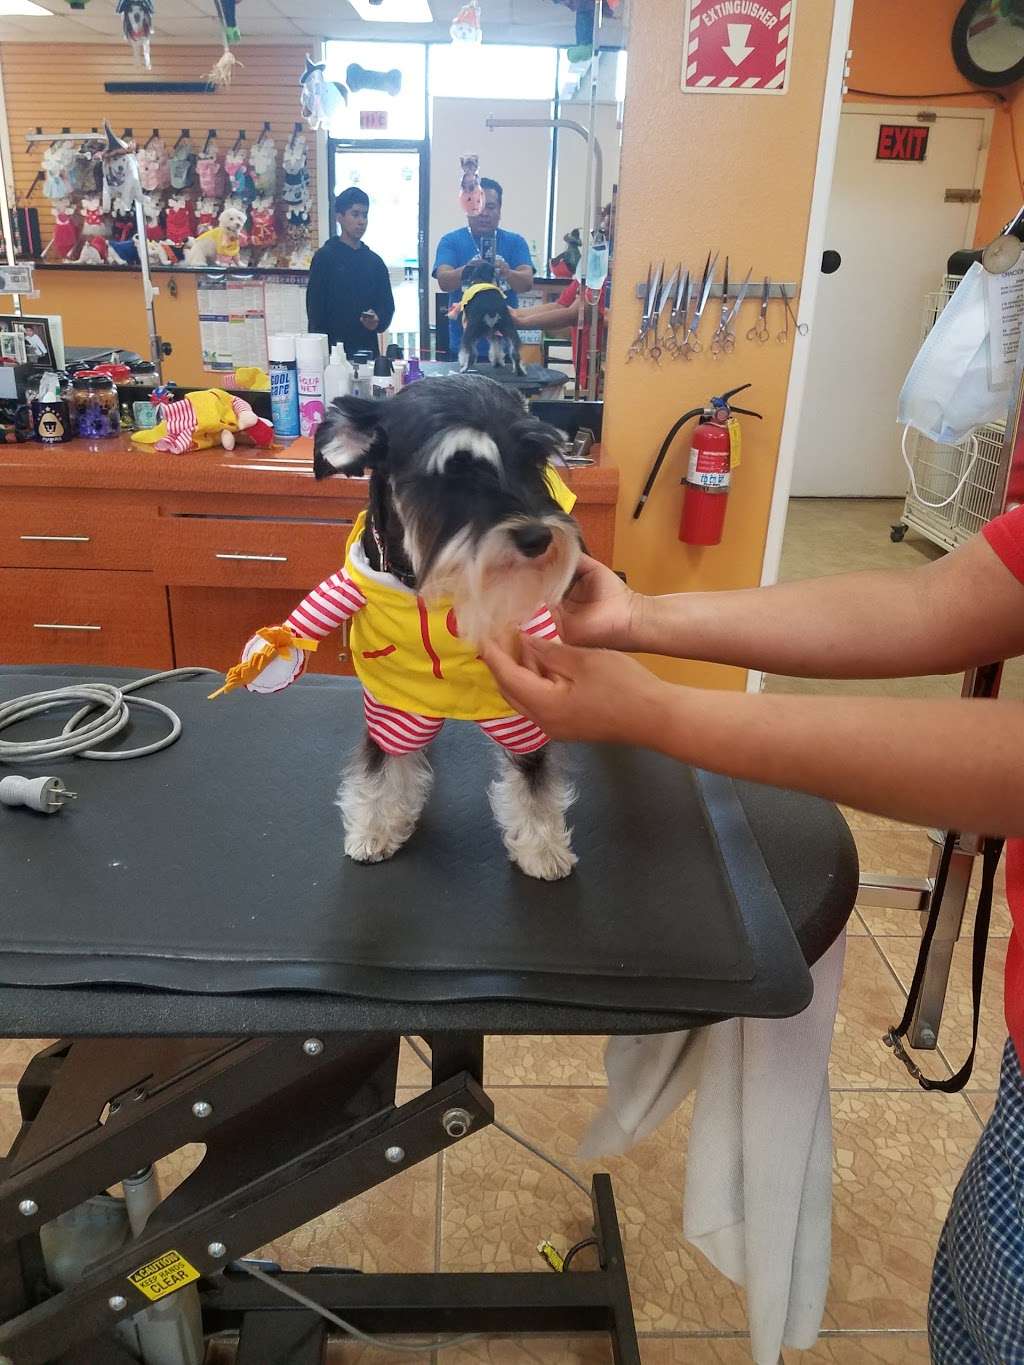 Its a Doodle Pet Grooming | 5542 South St, Lakewood, CA 90713 | Phone: (562) 925-0500